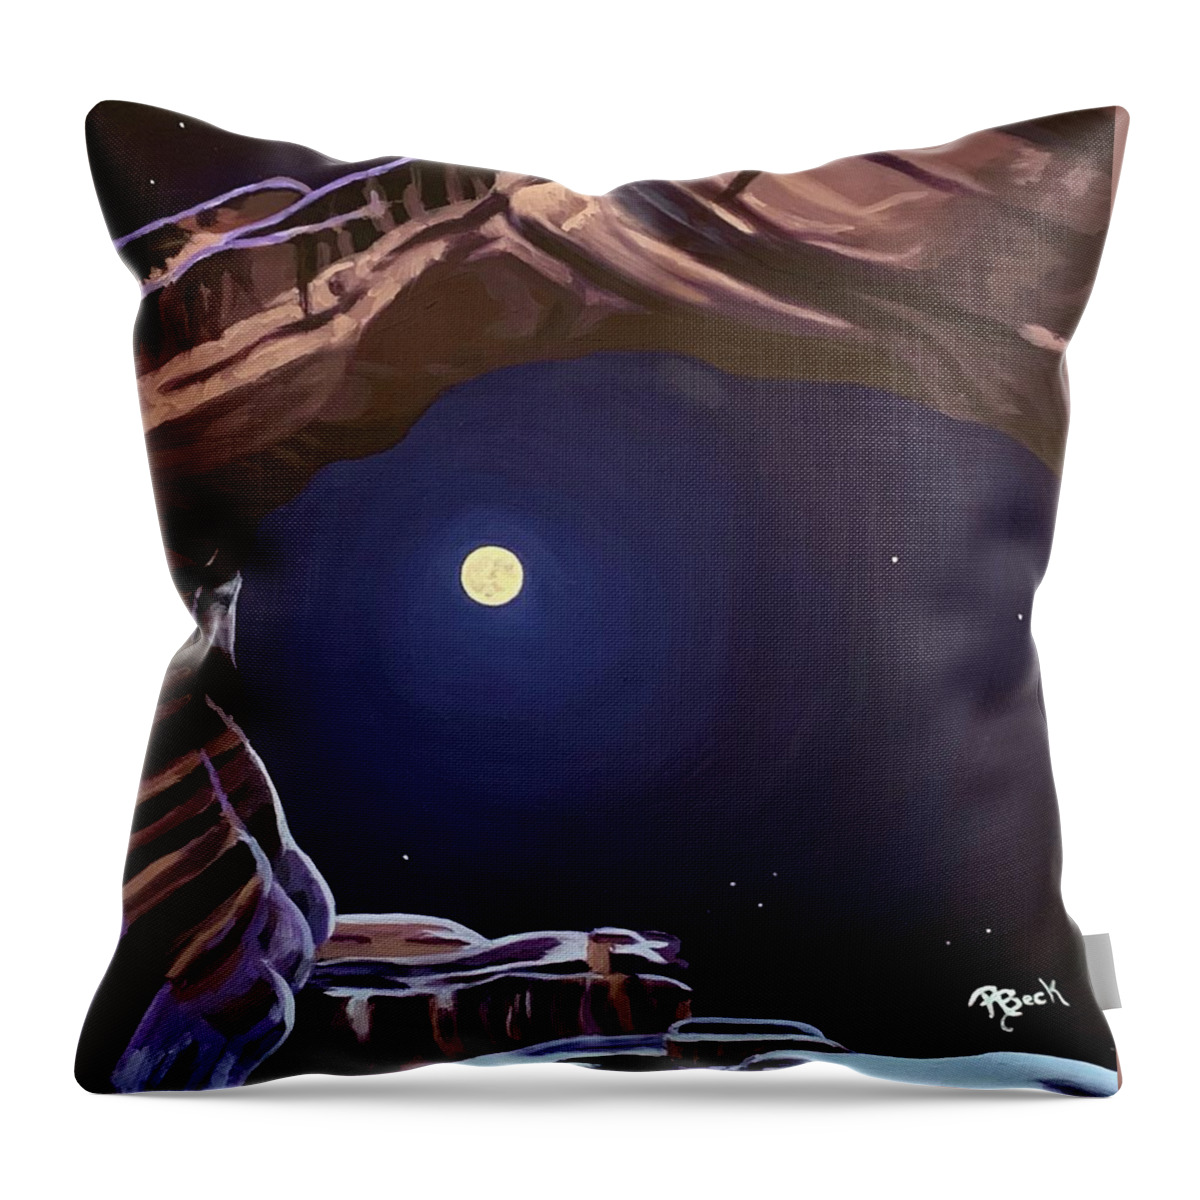 Natural Bridges Throw Pillow featuring the painting Sipapu Bridge by Rachel Suzanne Beck